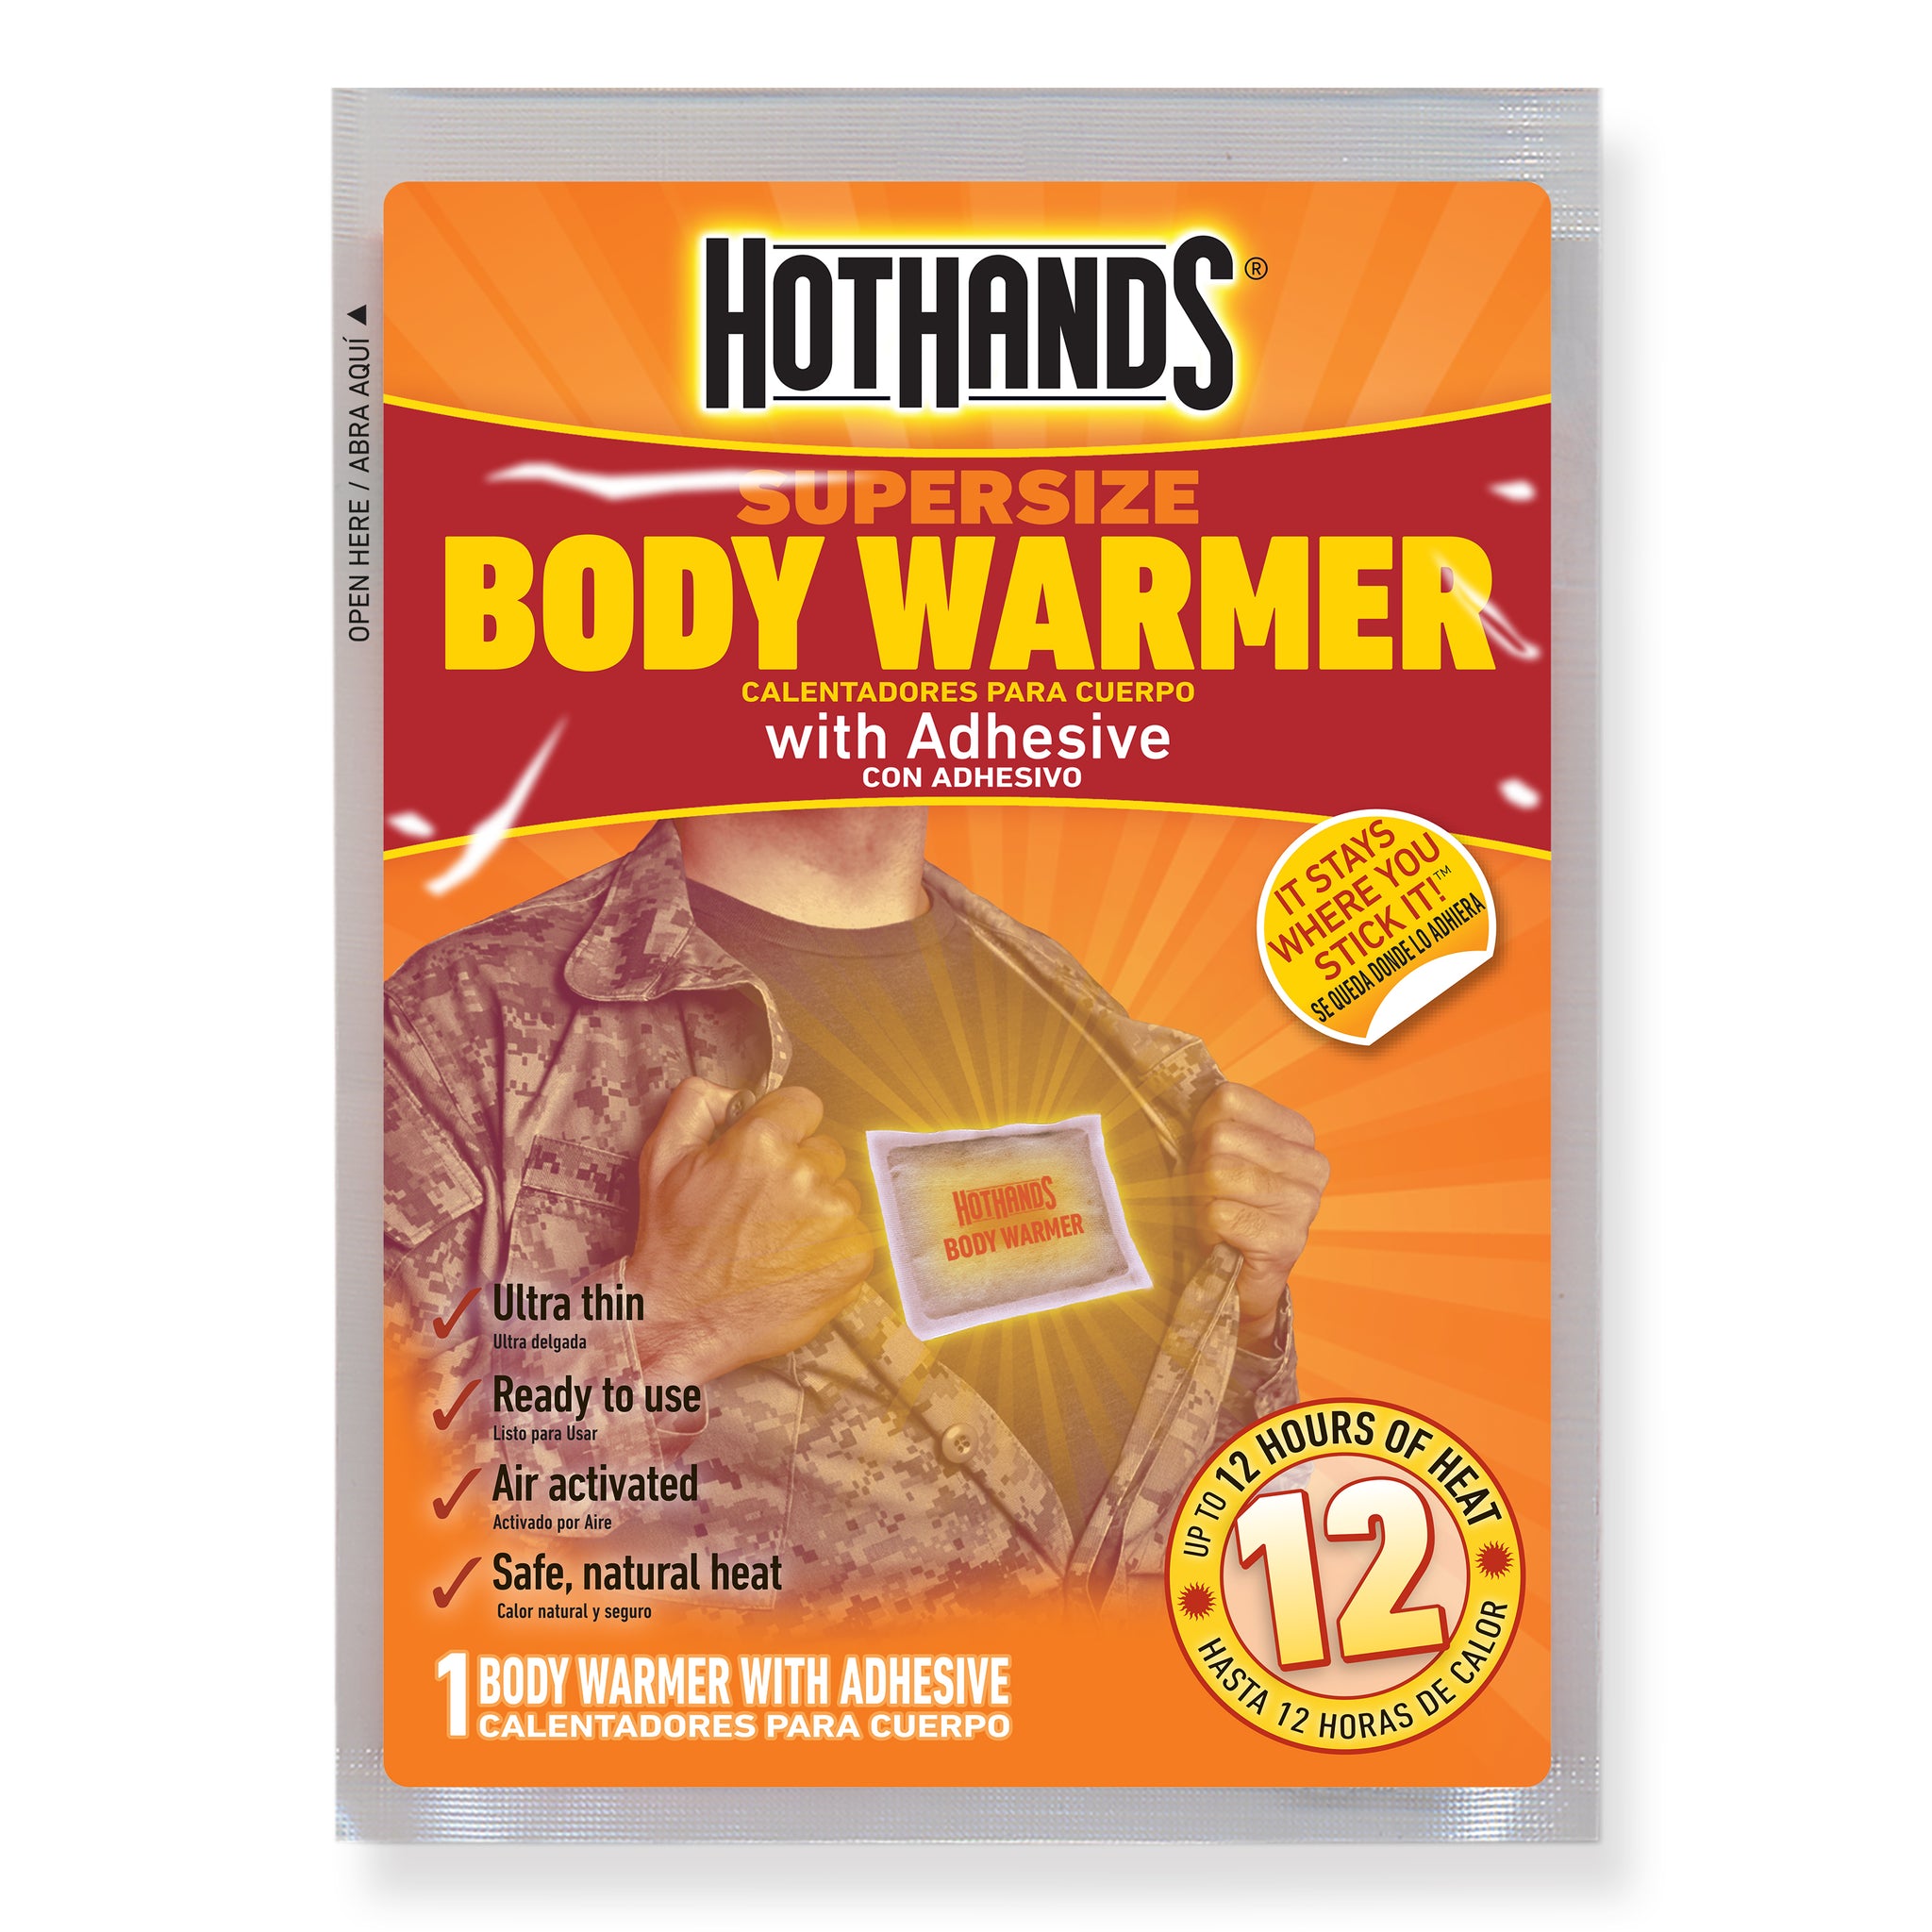 HotHands Body Warmer with Adhesive